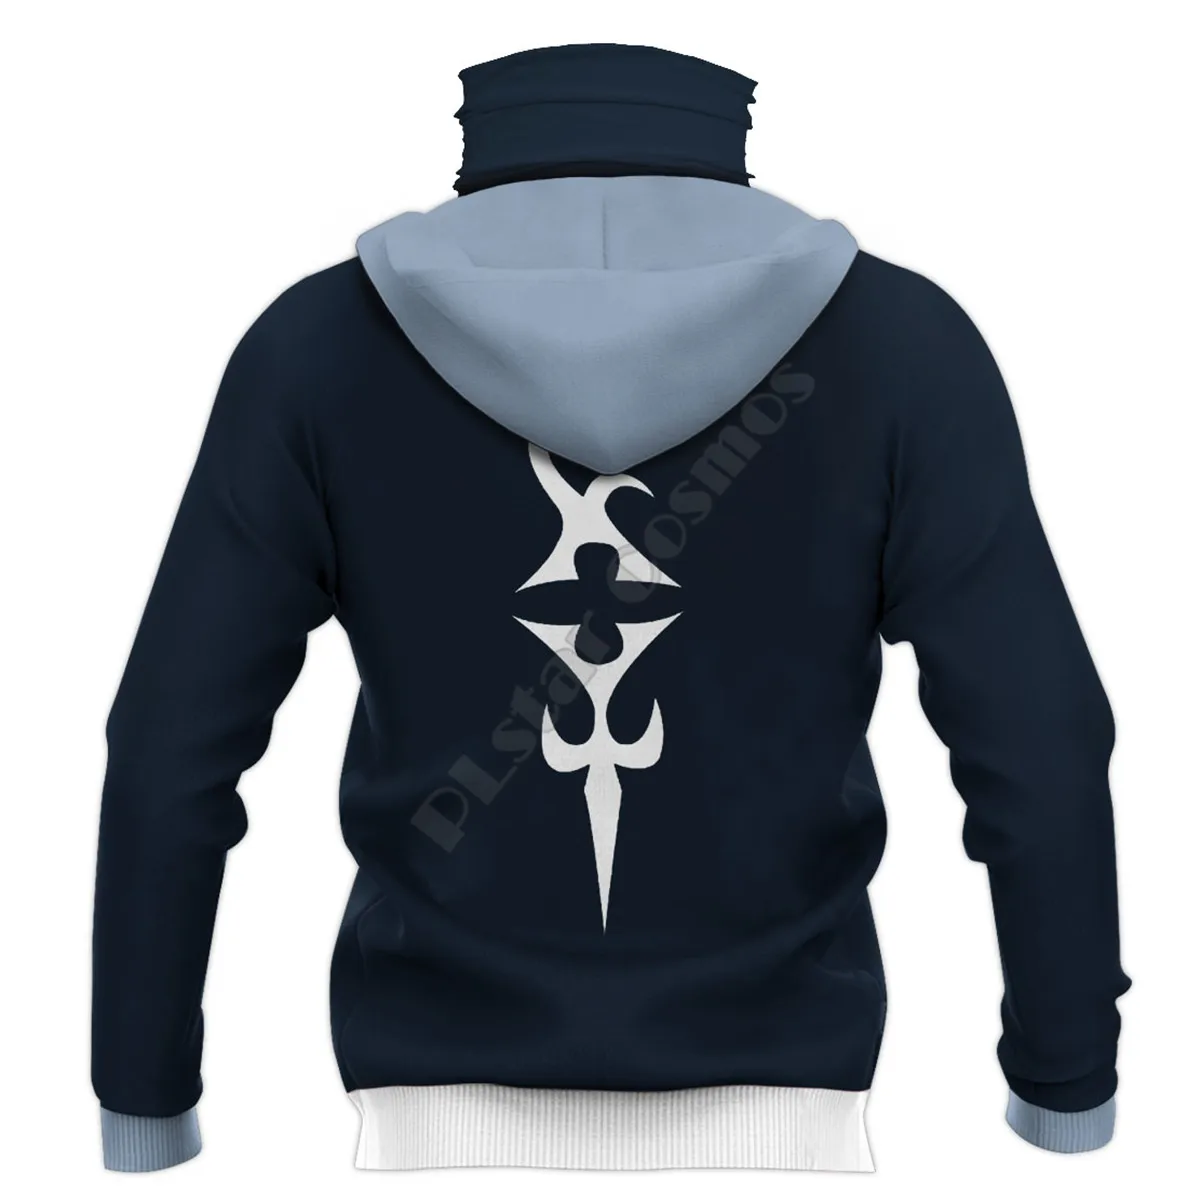 Fairy Tail 3D Printed Hoodies Fashion Sweatshirt Women Men Casual Pullover Hoodie Mask Warm Cosplay Costumes 05 images - 6